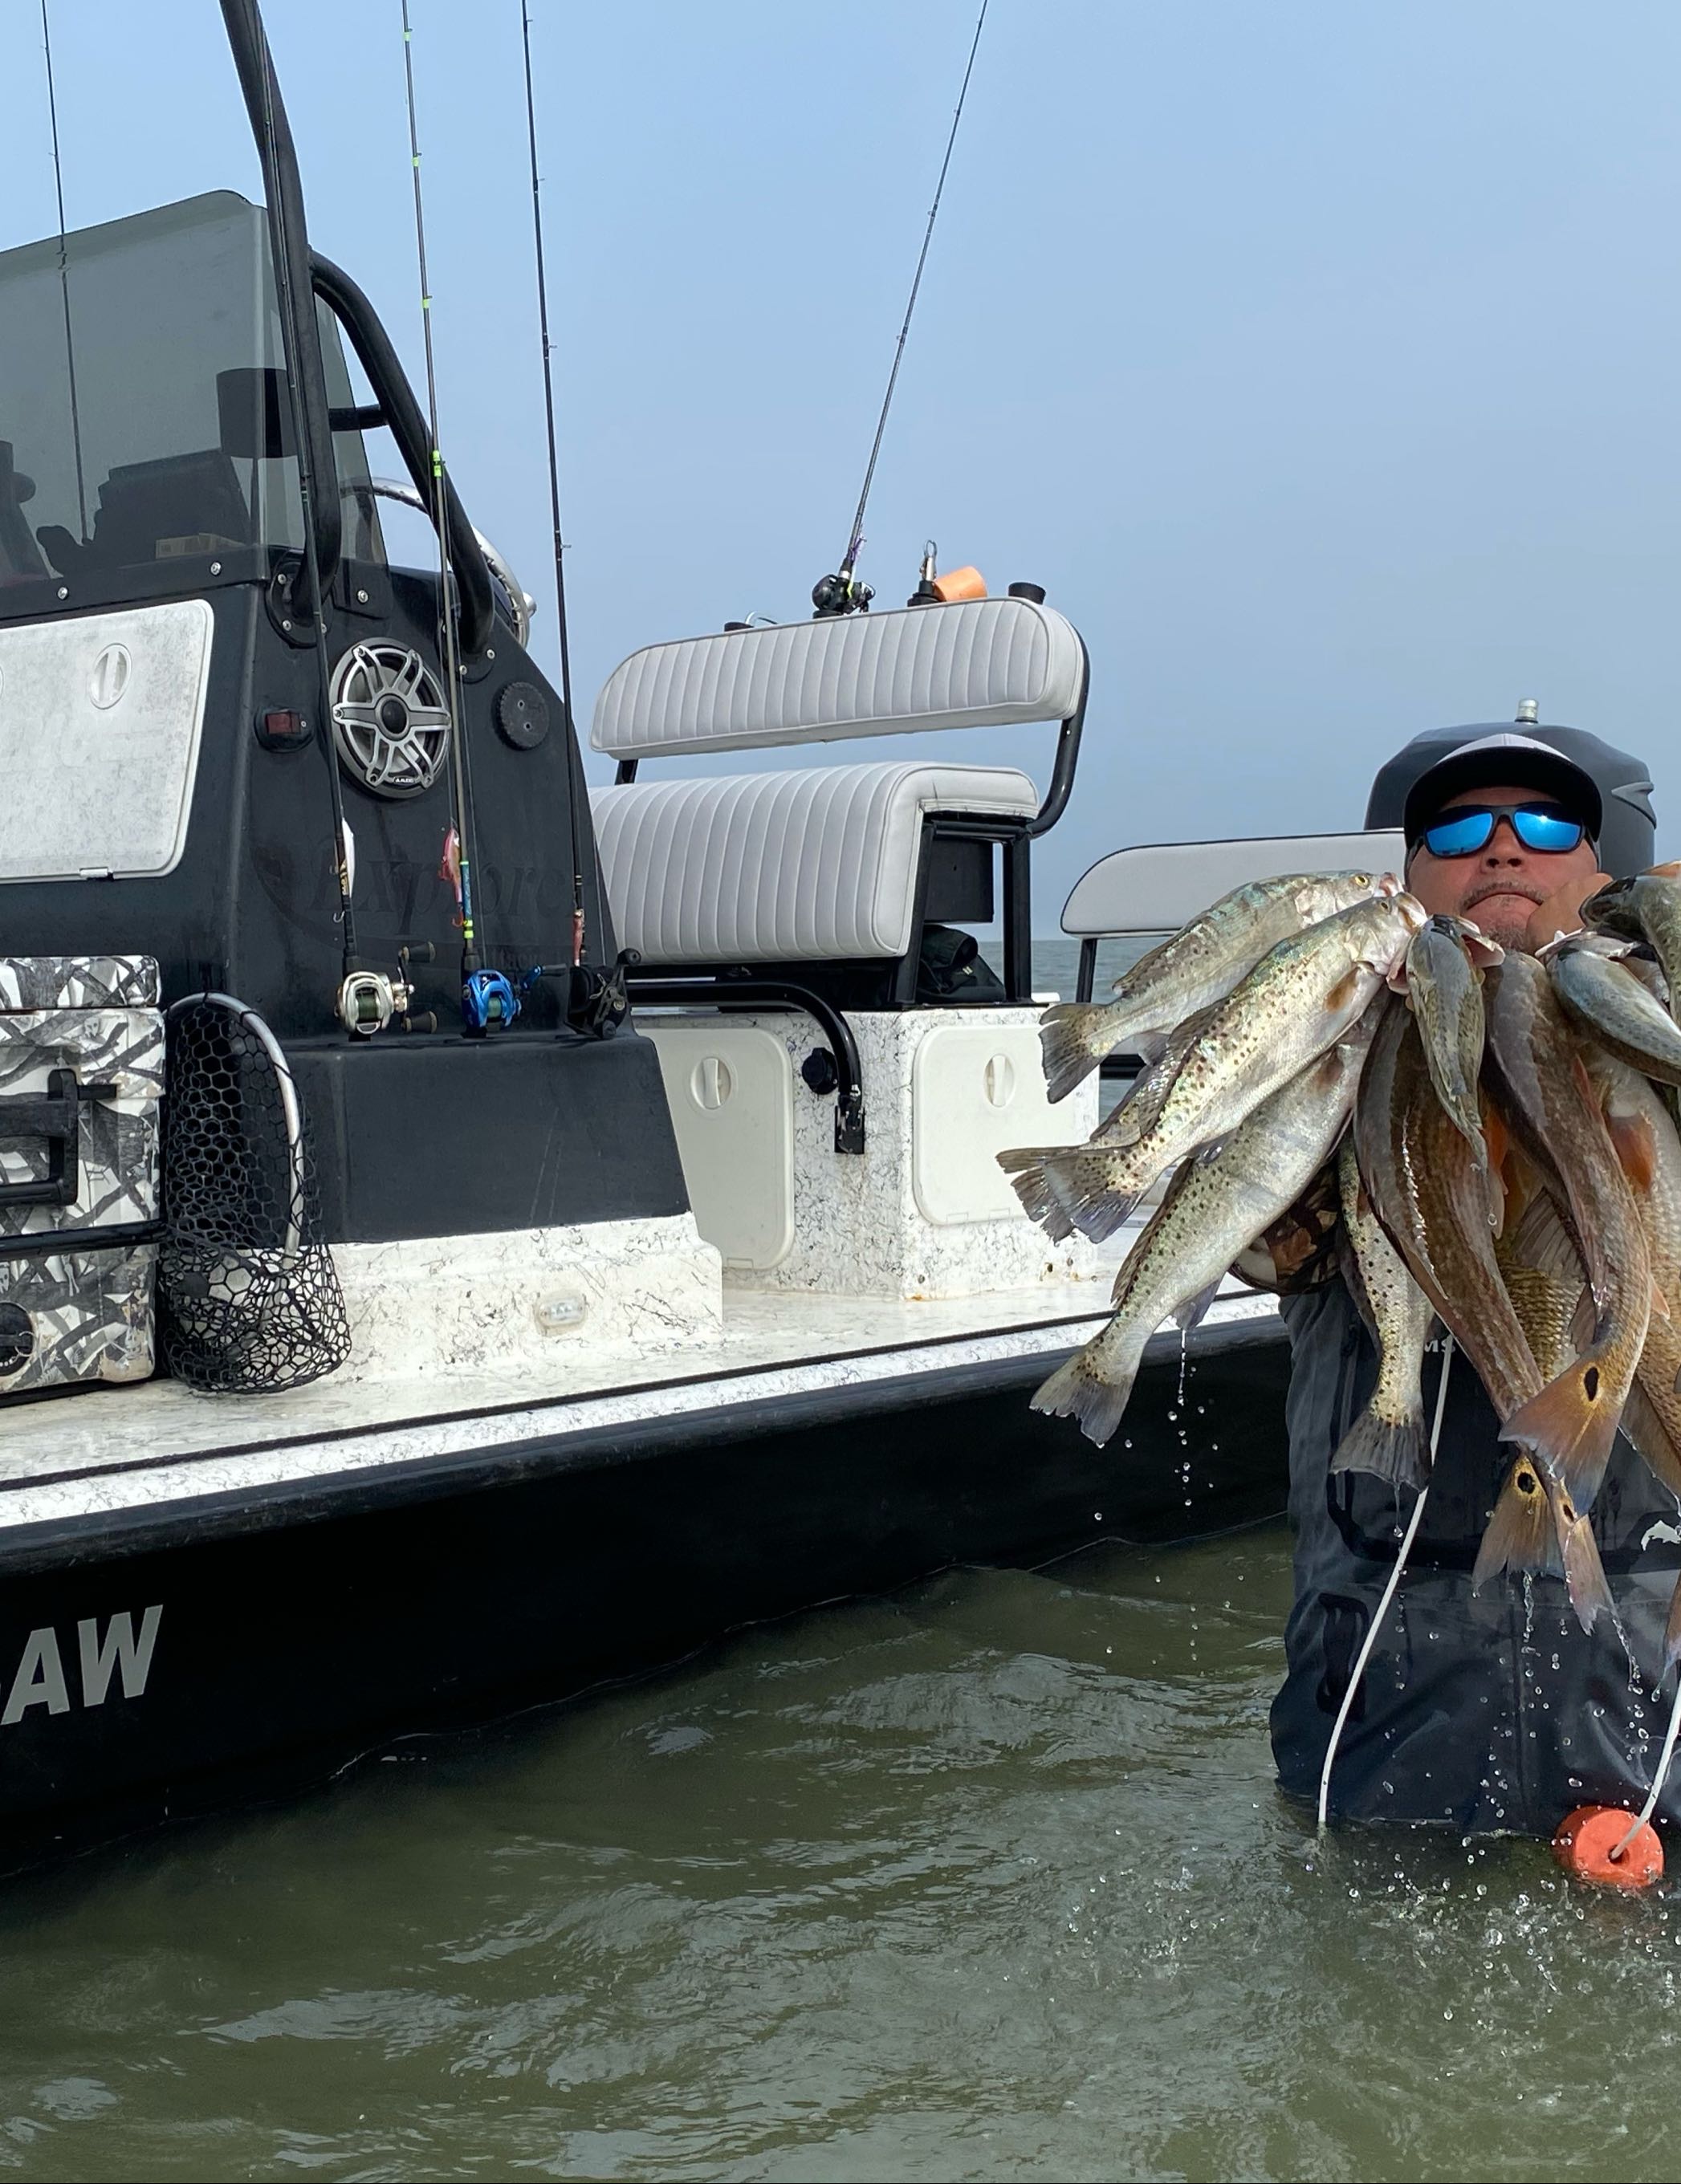 Matagorda Fishing Charter Prices Gon Get’em Guide Service